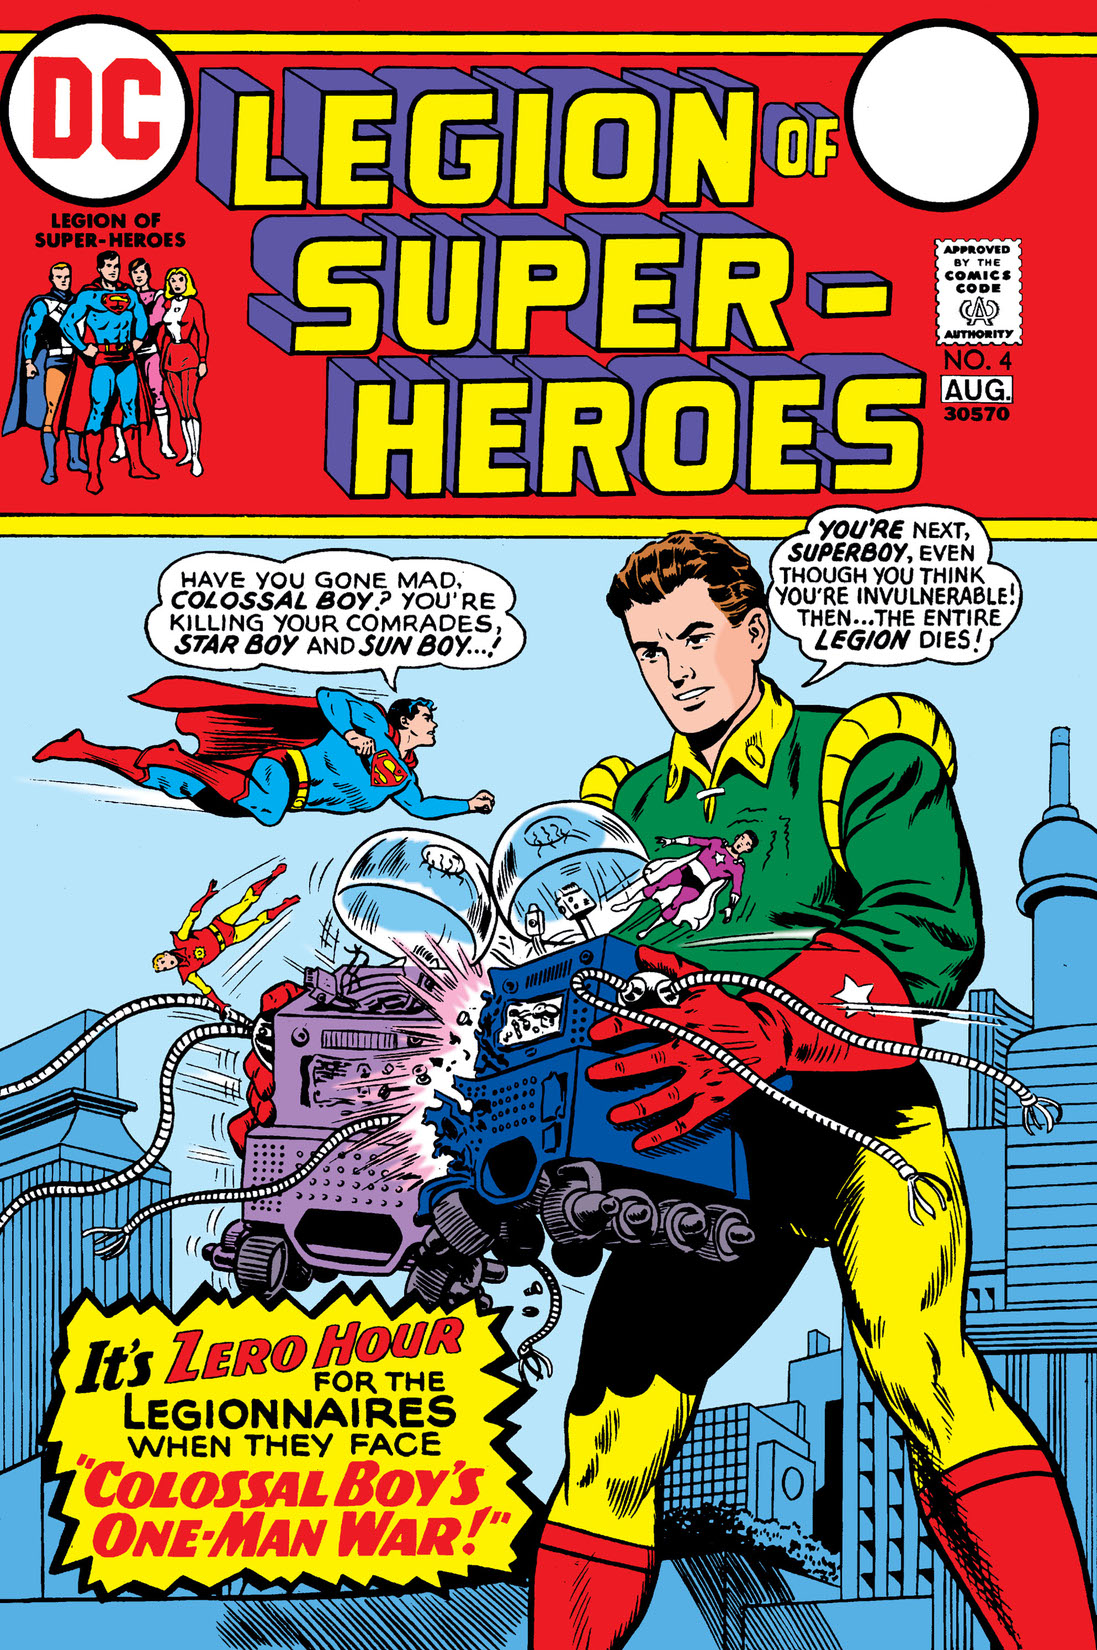 Legion of Super-Heroes (1973-1973) #4 preview images